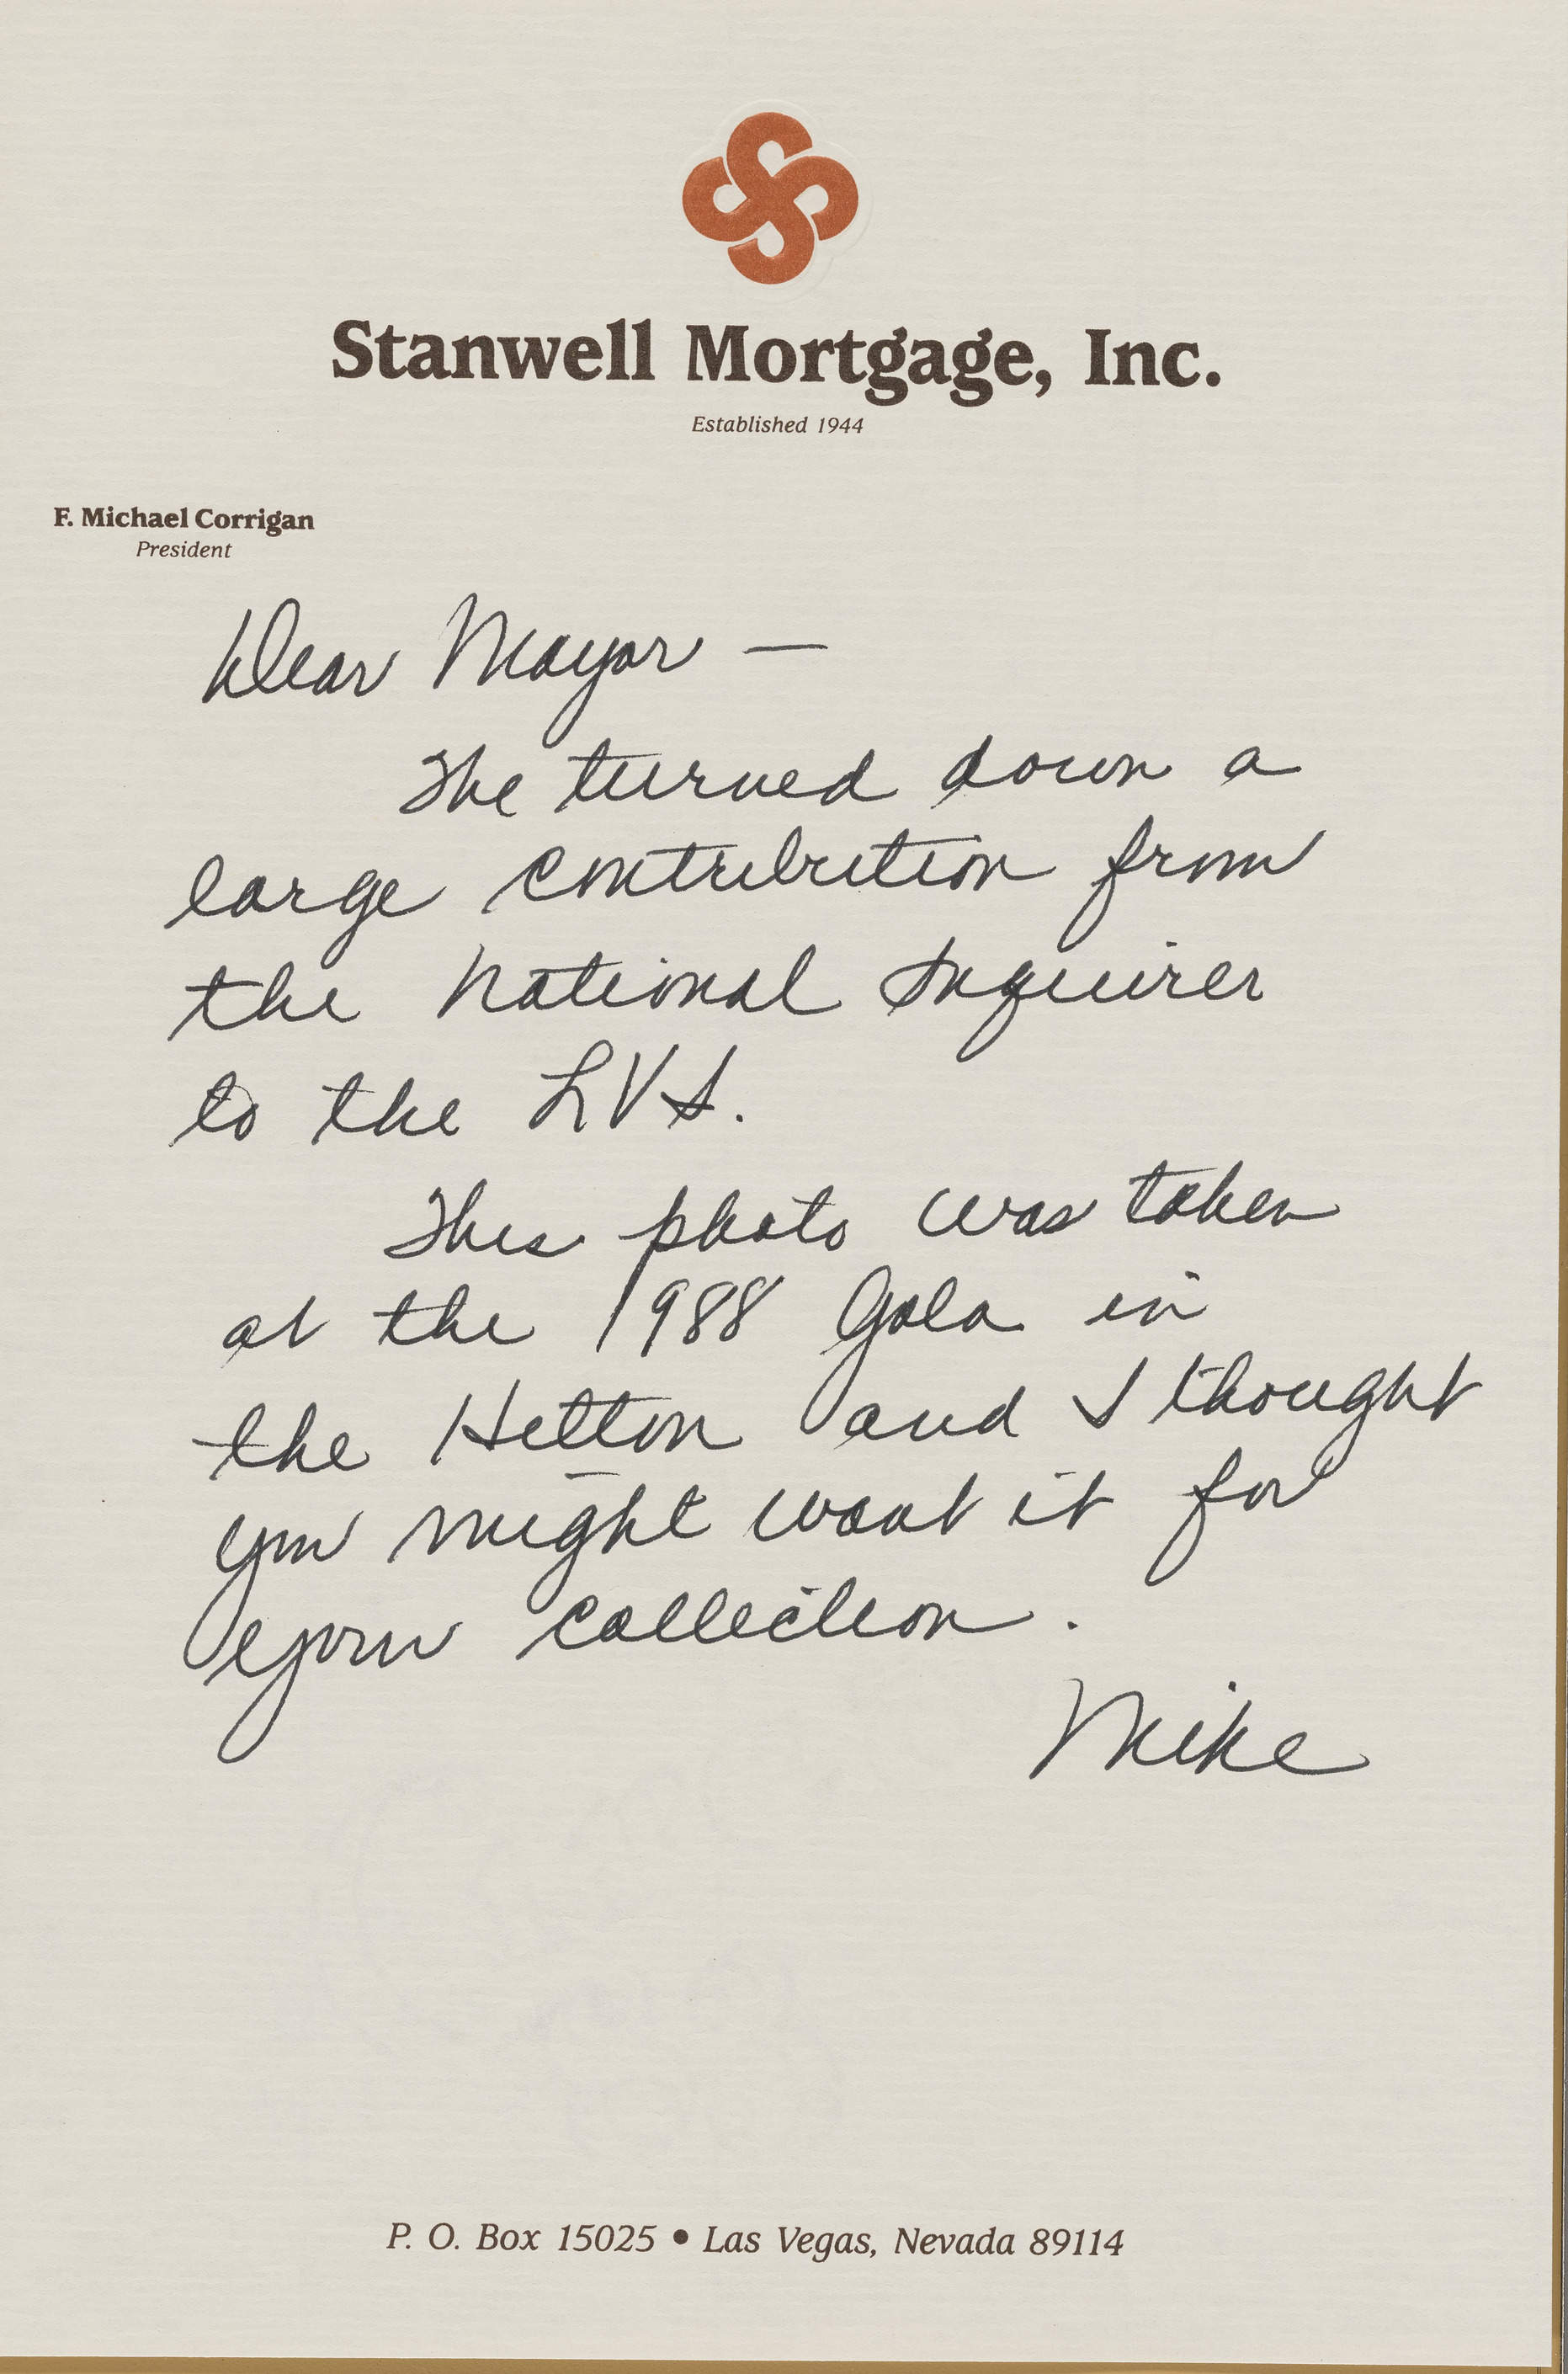 Handwritten note from Mike to Mayor (Lurie), undated